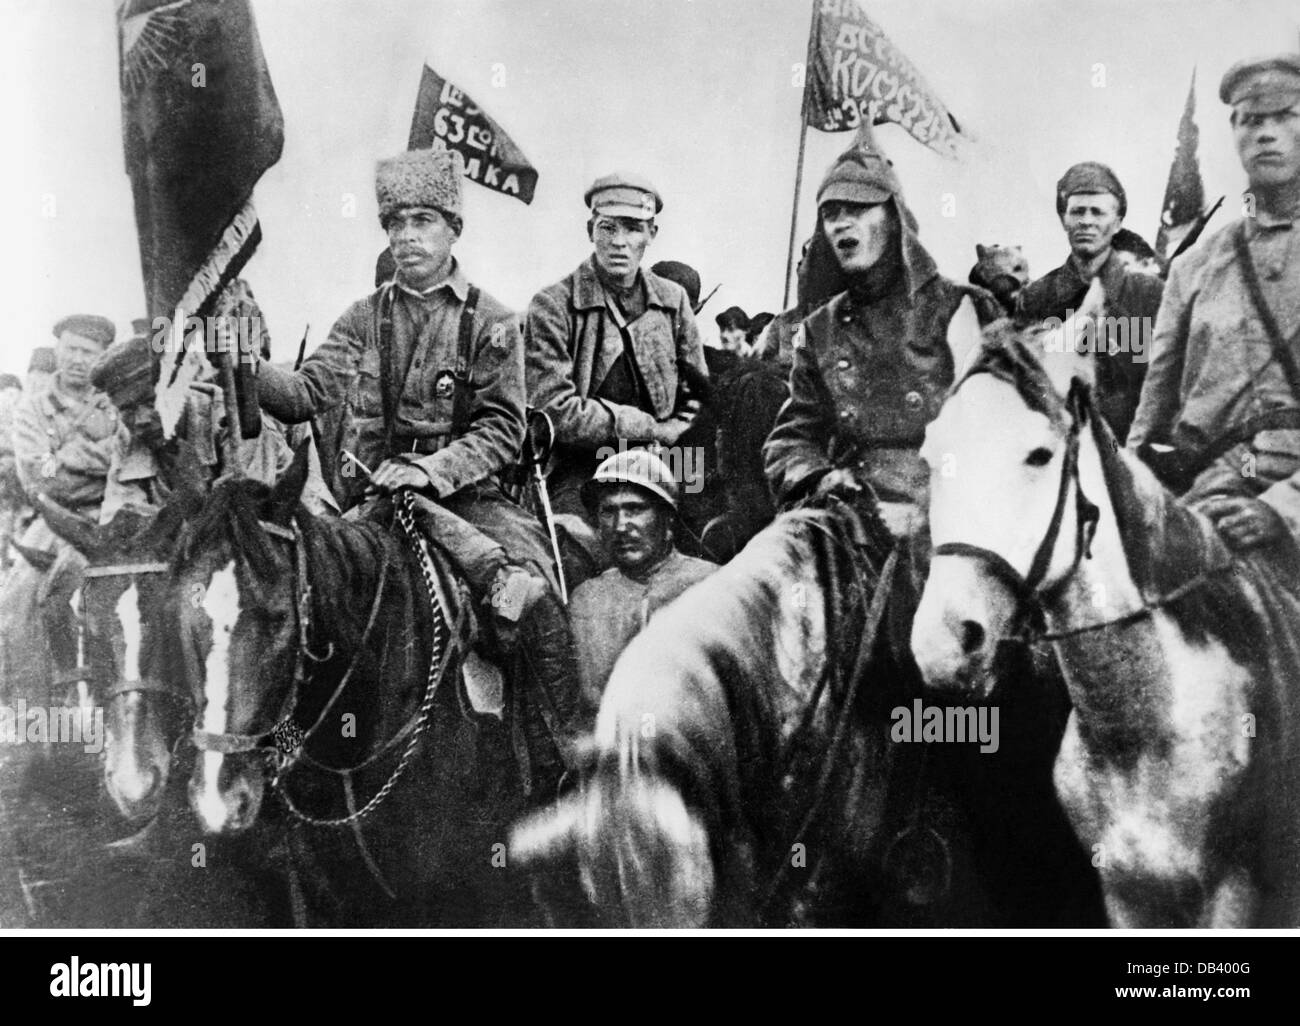 Polish-Soviet War 1919 - 1921, cavalrymen of the 1st Red Cavalry Army (General Budyonny), 1920, Polish - Soviet War, Russia, Poland, soldiers, soldier, military, Soviet Union, people, 1920s, 20s, 20th century, historic, historical, Additional-Rights-Clearences-Not Available Stock Photo